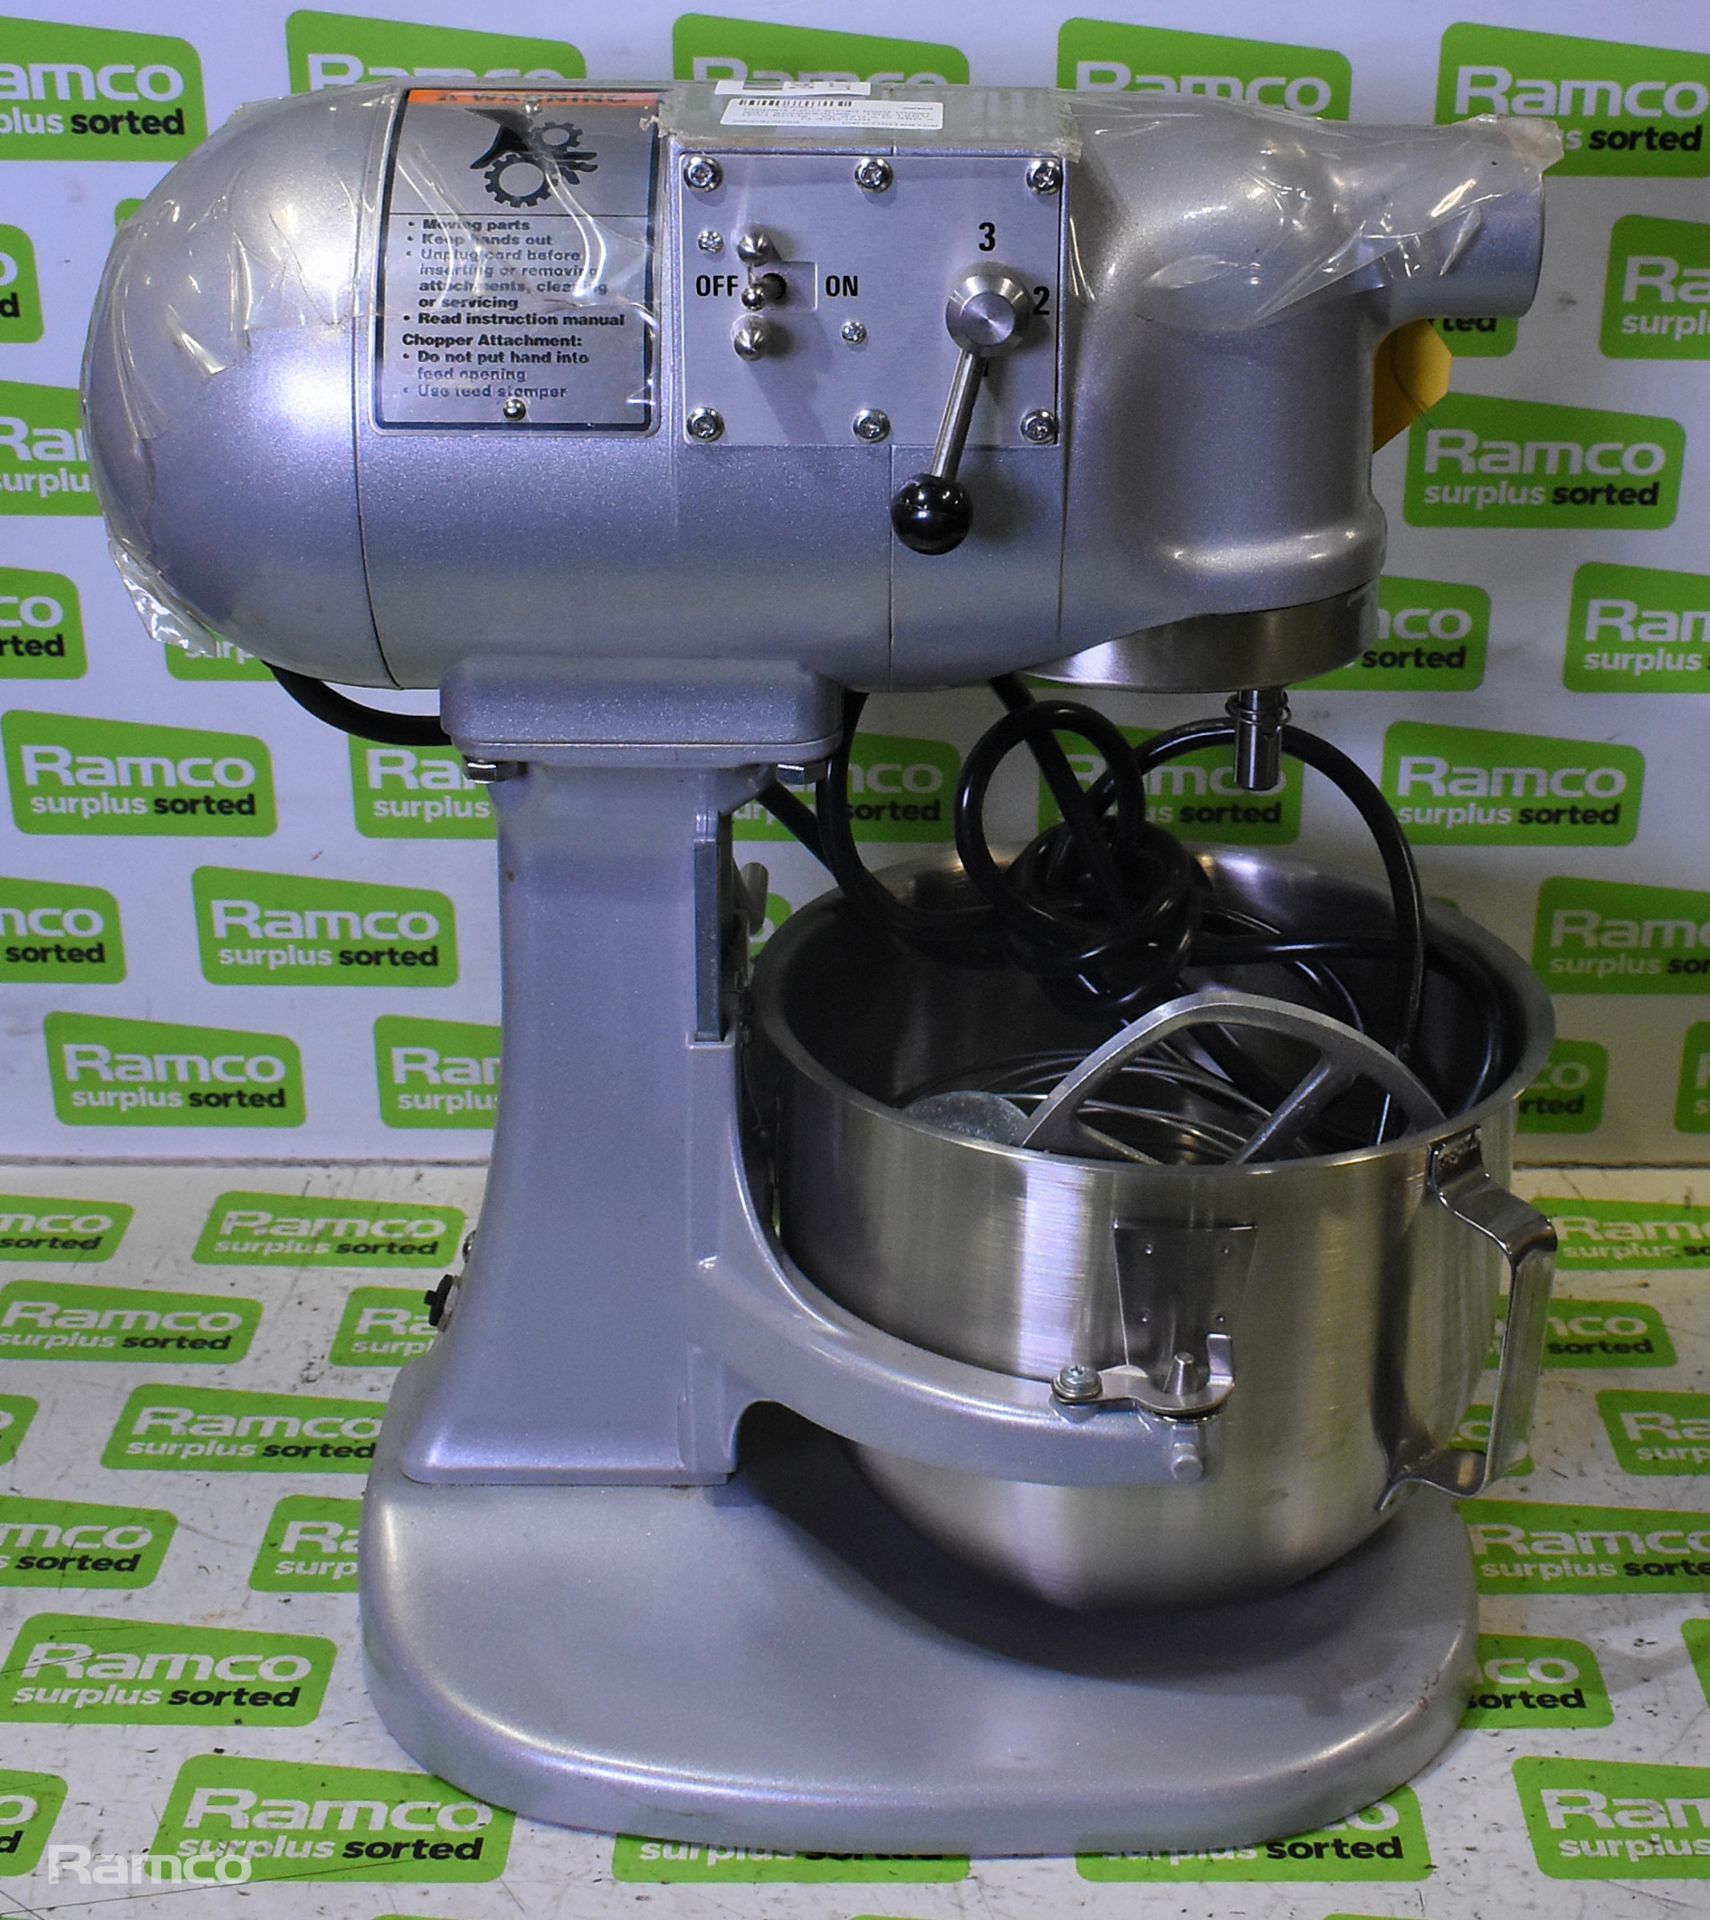 Hobart N50 small food mixer with accessories - 100-120V - 1ph - 60Hz - W 270 x D 380 x H 430mm - Image 3 of 10